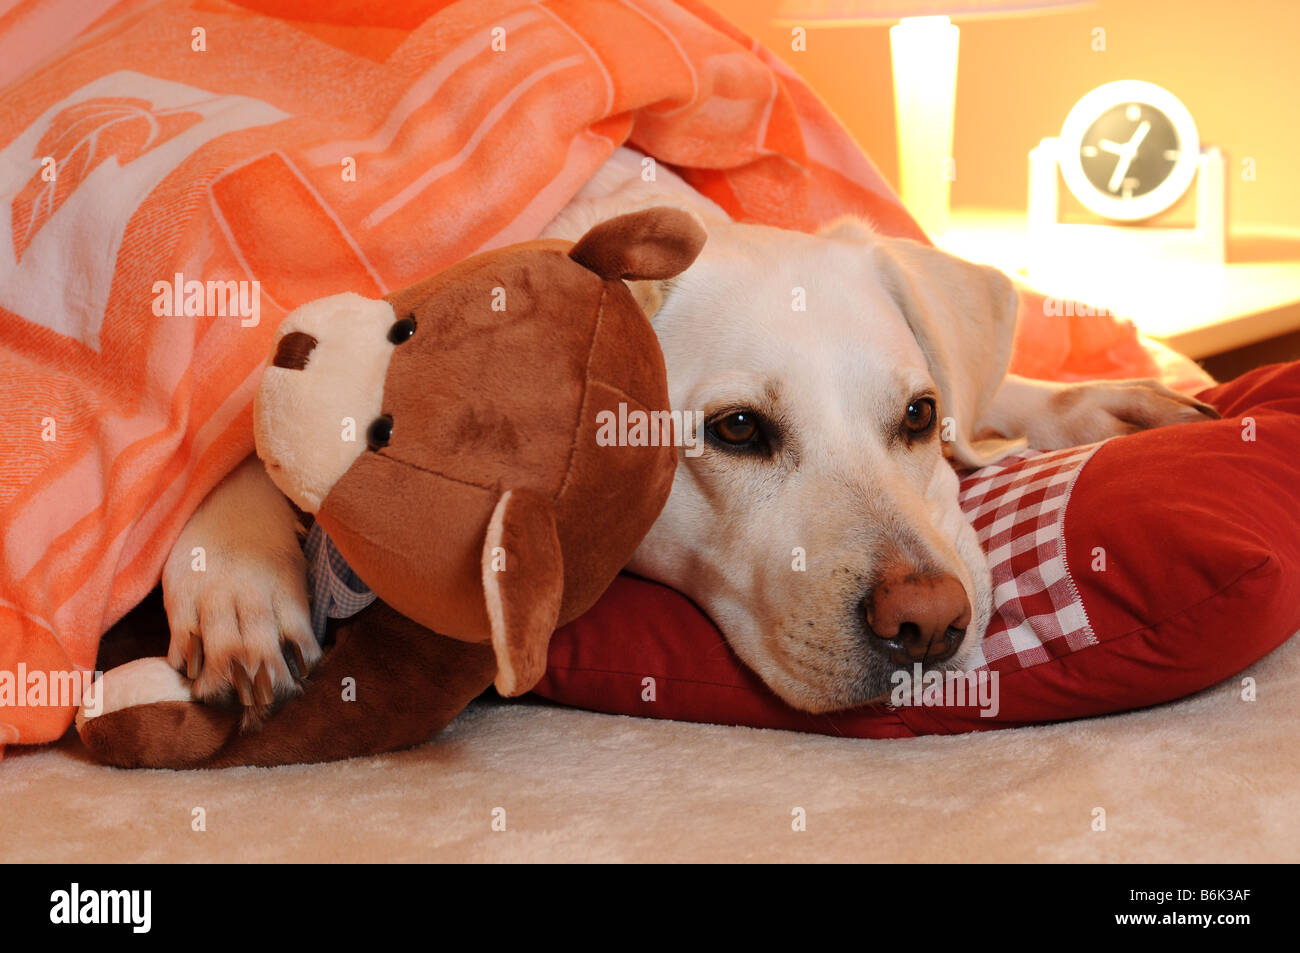 White labrador retriever lying in bed with a teddy bear. Stock Photo